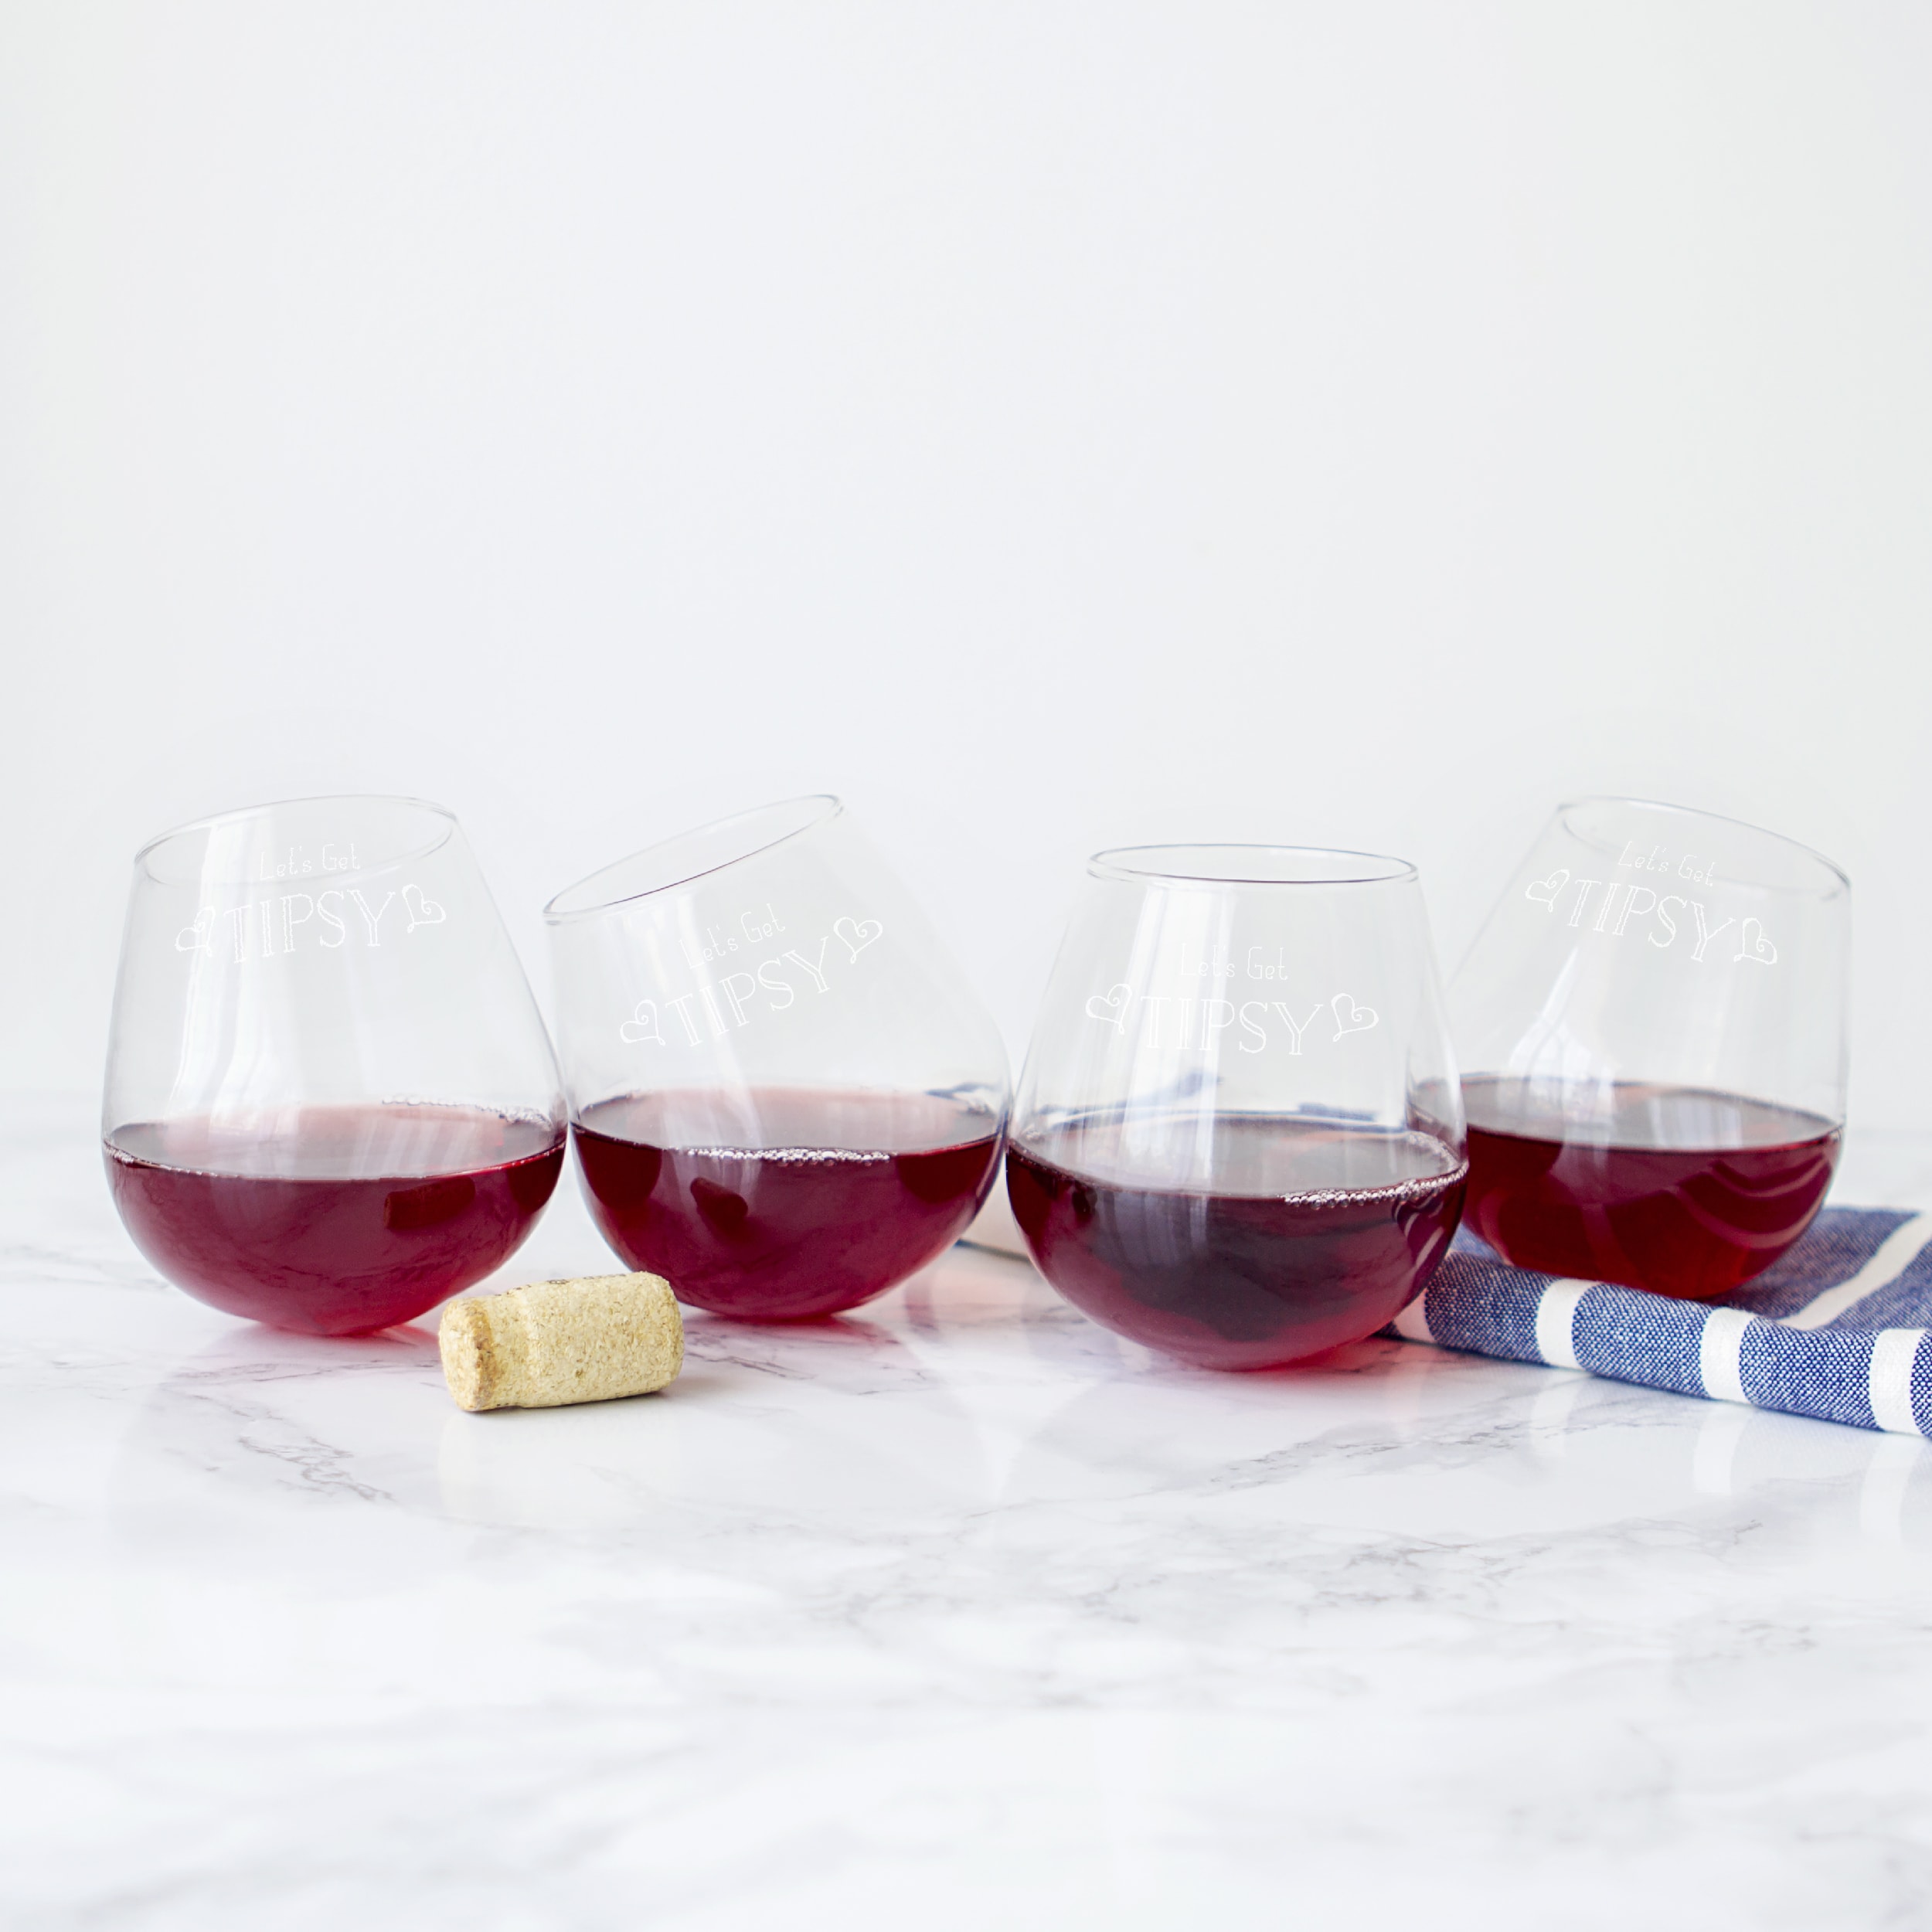 Let's Get Tipsy 12-ounce Tipsy Wine Glasses (Set of 4) - Bed Bath & Beyond  - 12590266